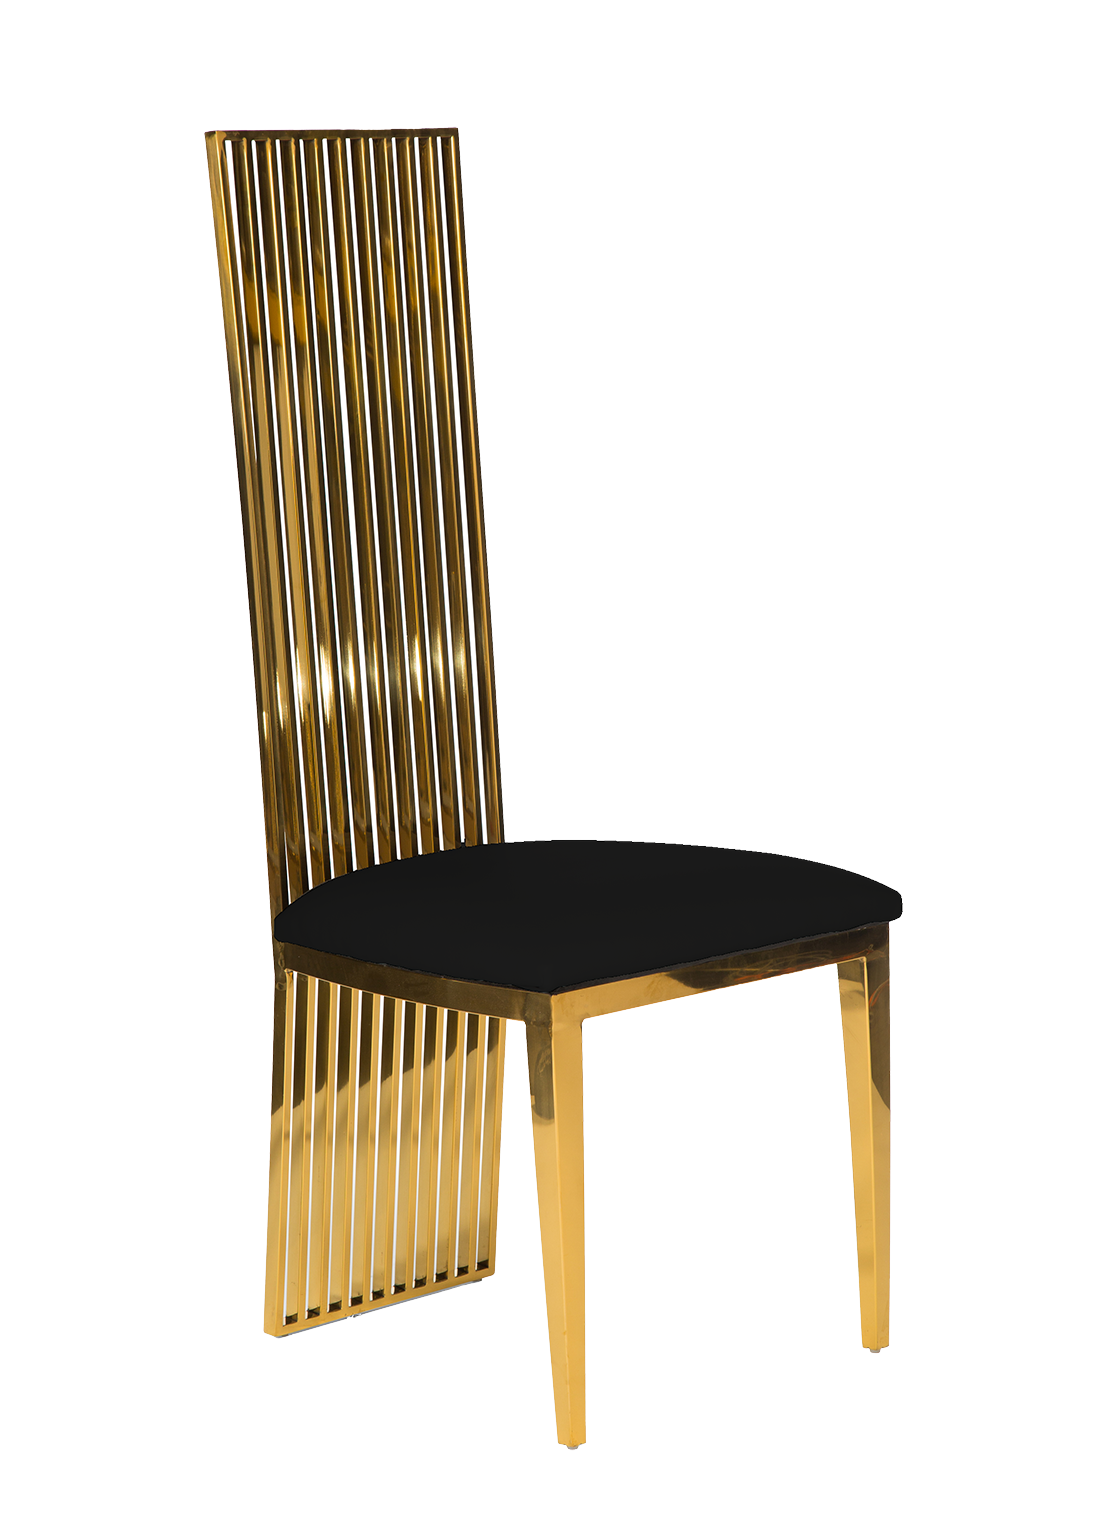 A contemporary chair with a glossy gold vertical slat back and black cushioned seat, isolated on a white background.